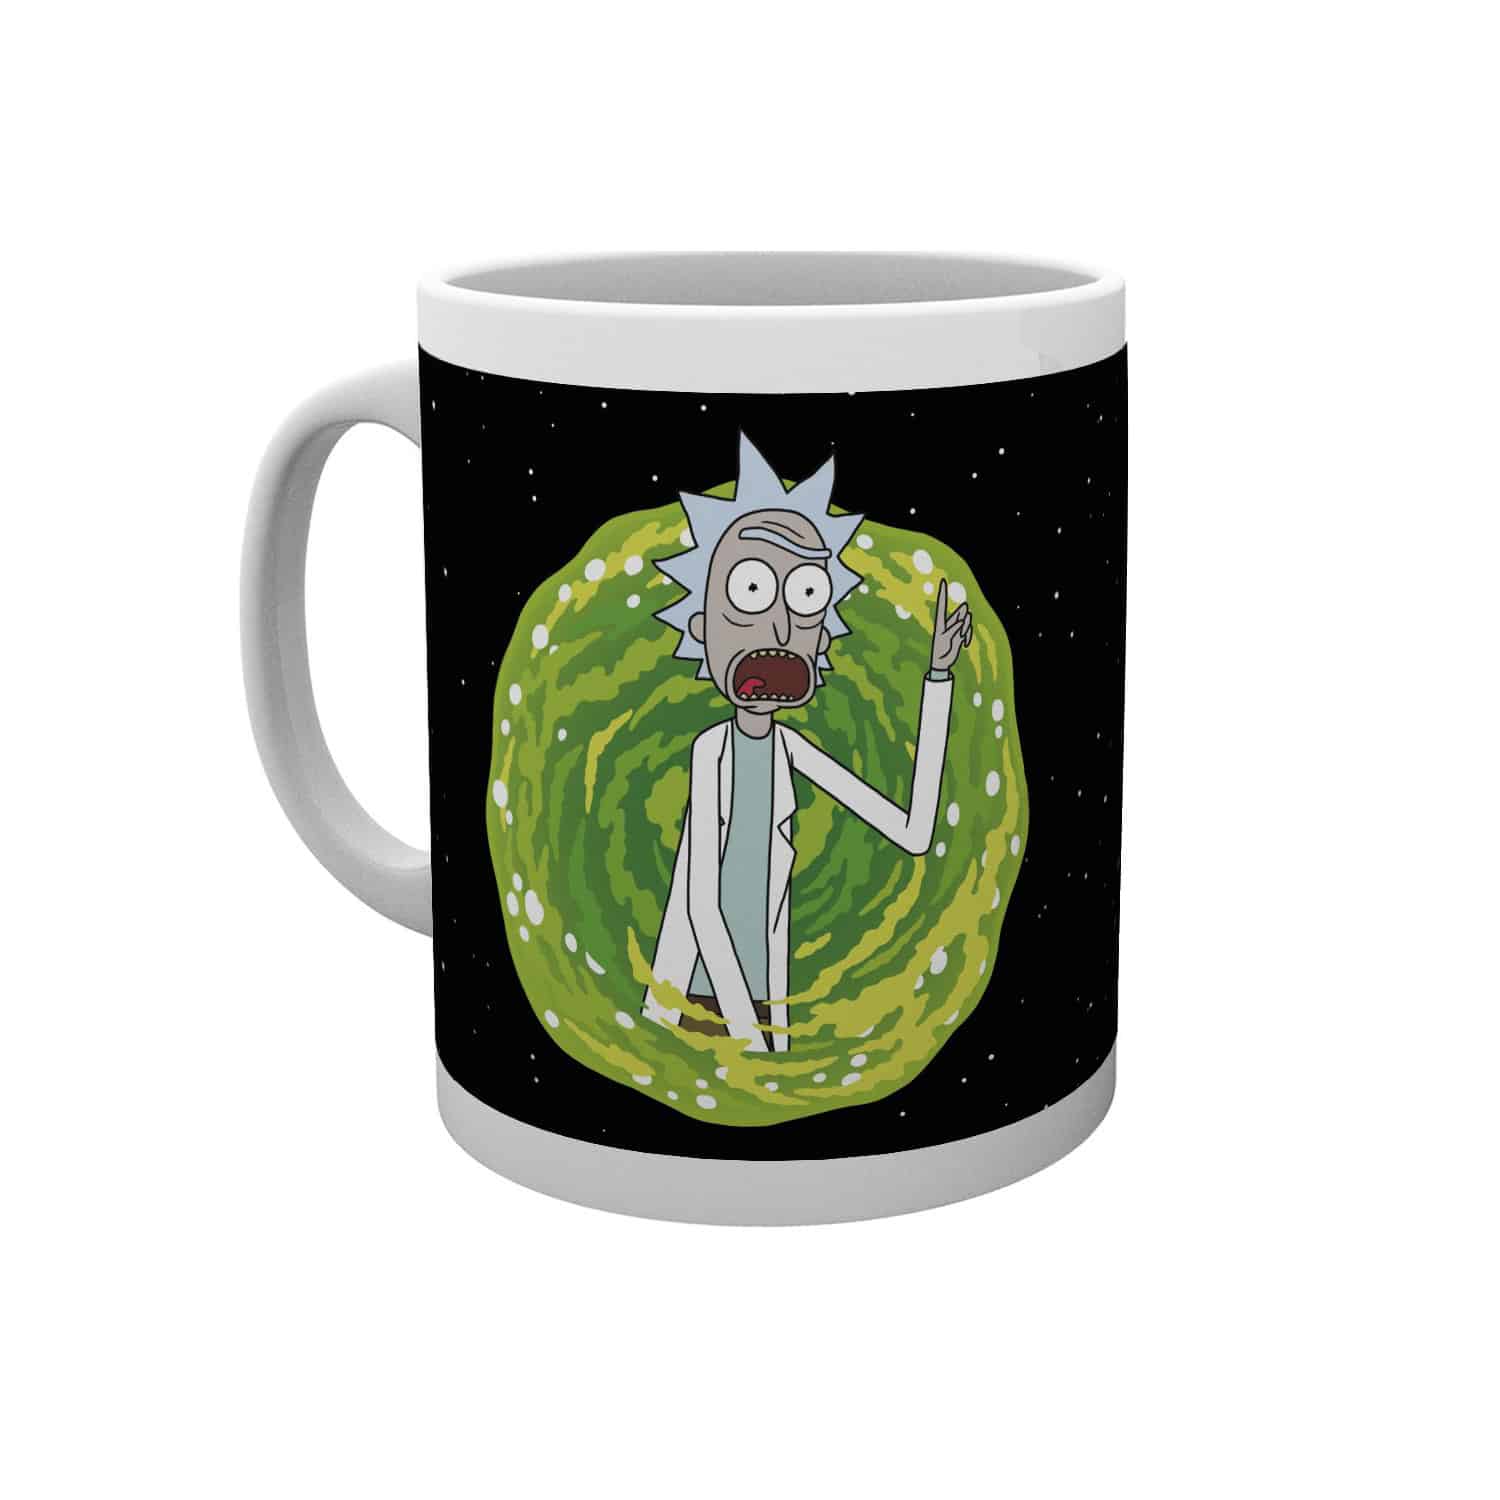 15 Ounces Great Gift for Rick and Morty Fans I'm Sorry But Your Opinion Means Very Little to Me Coffee Mug Rick Morty Mug 